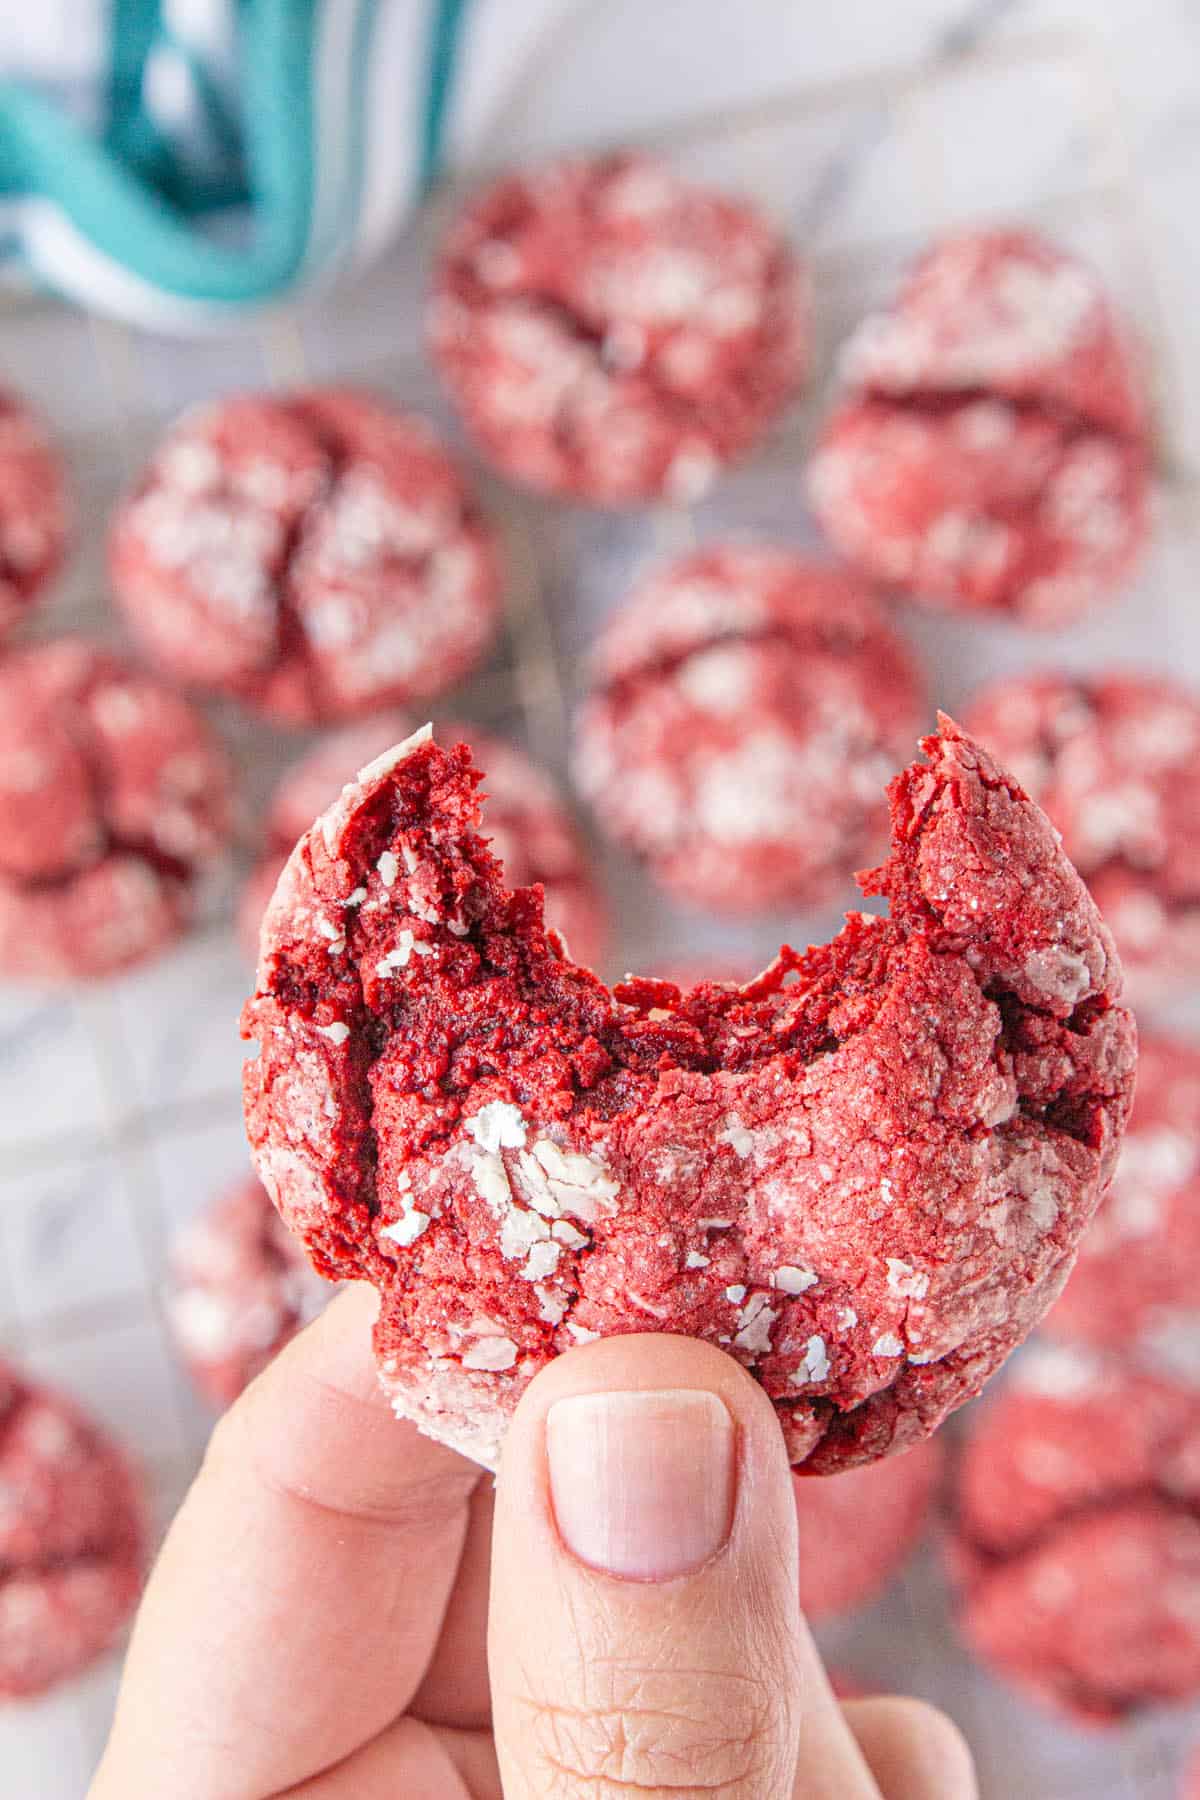 A hand holding a red velvet crinkle cookie that has had a bite taken out of it.